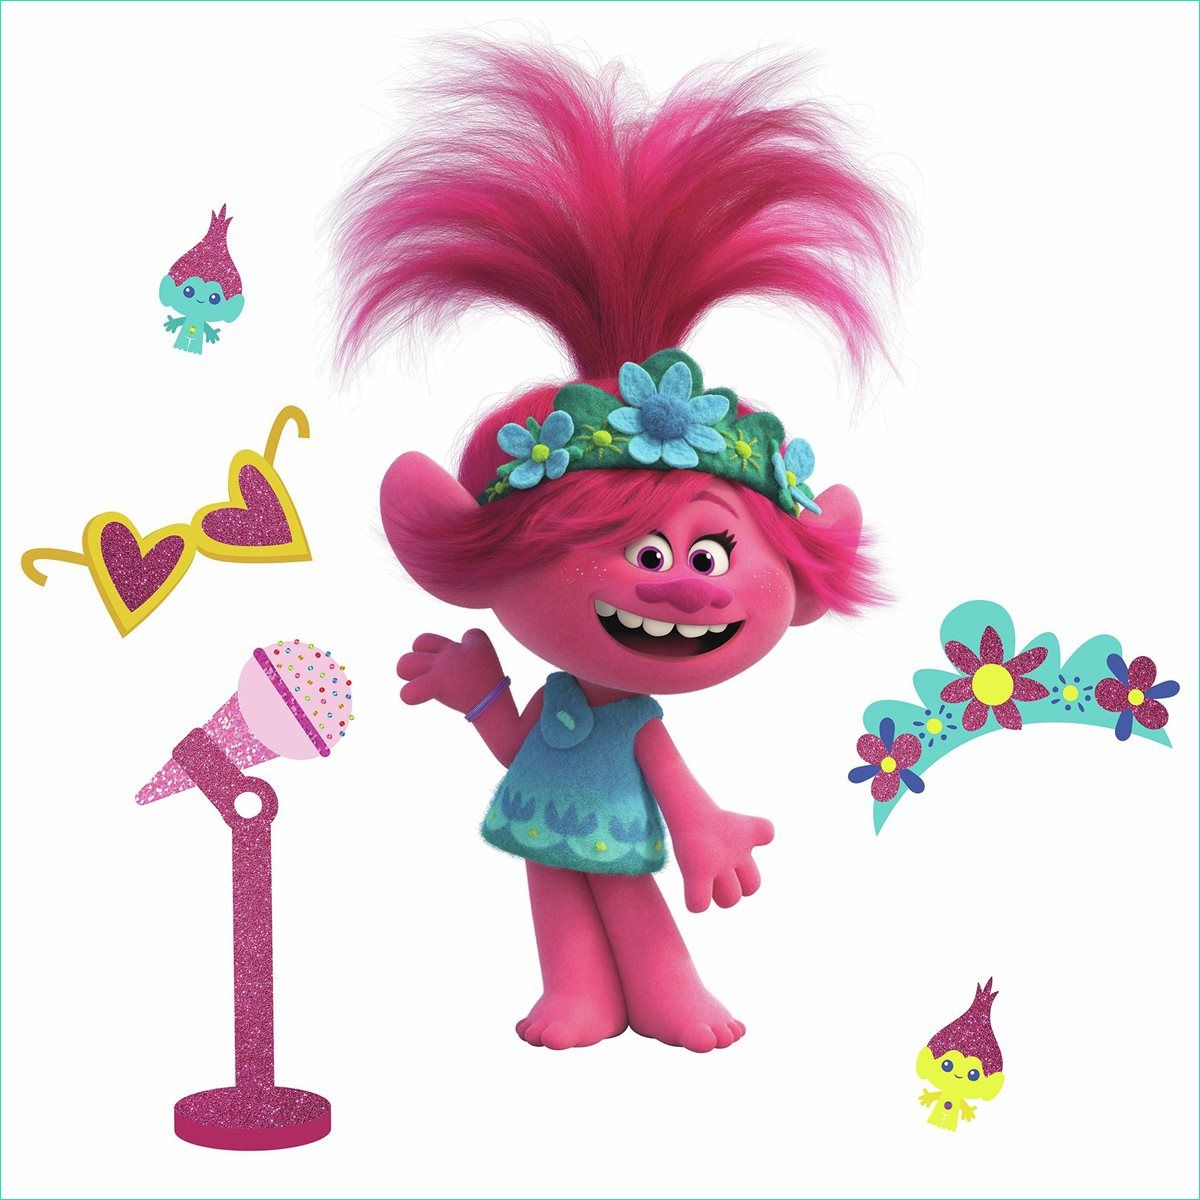 Poppy Troll Unique Collection Trolls World tour Poppy with Glitter Peel and Stick Giant Wall Decals